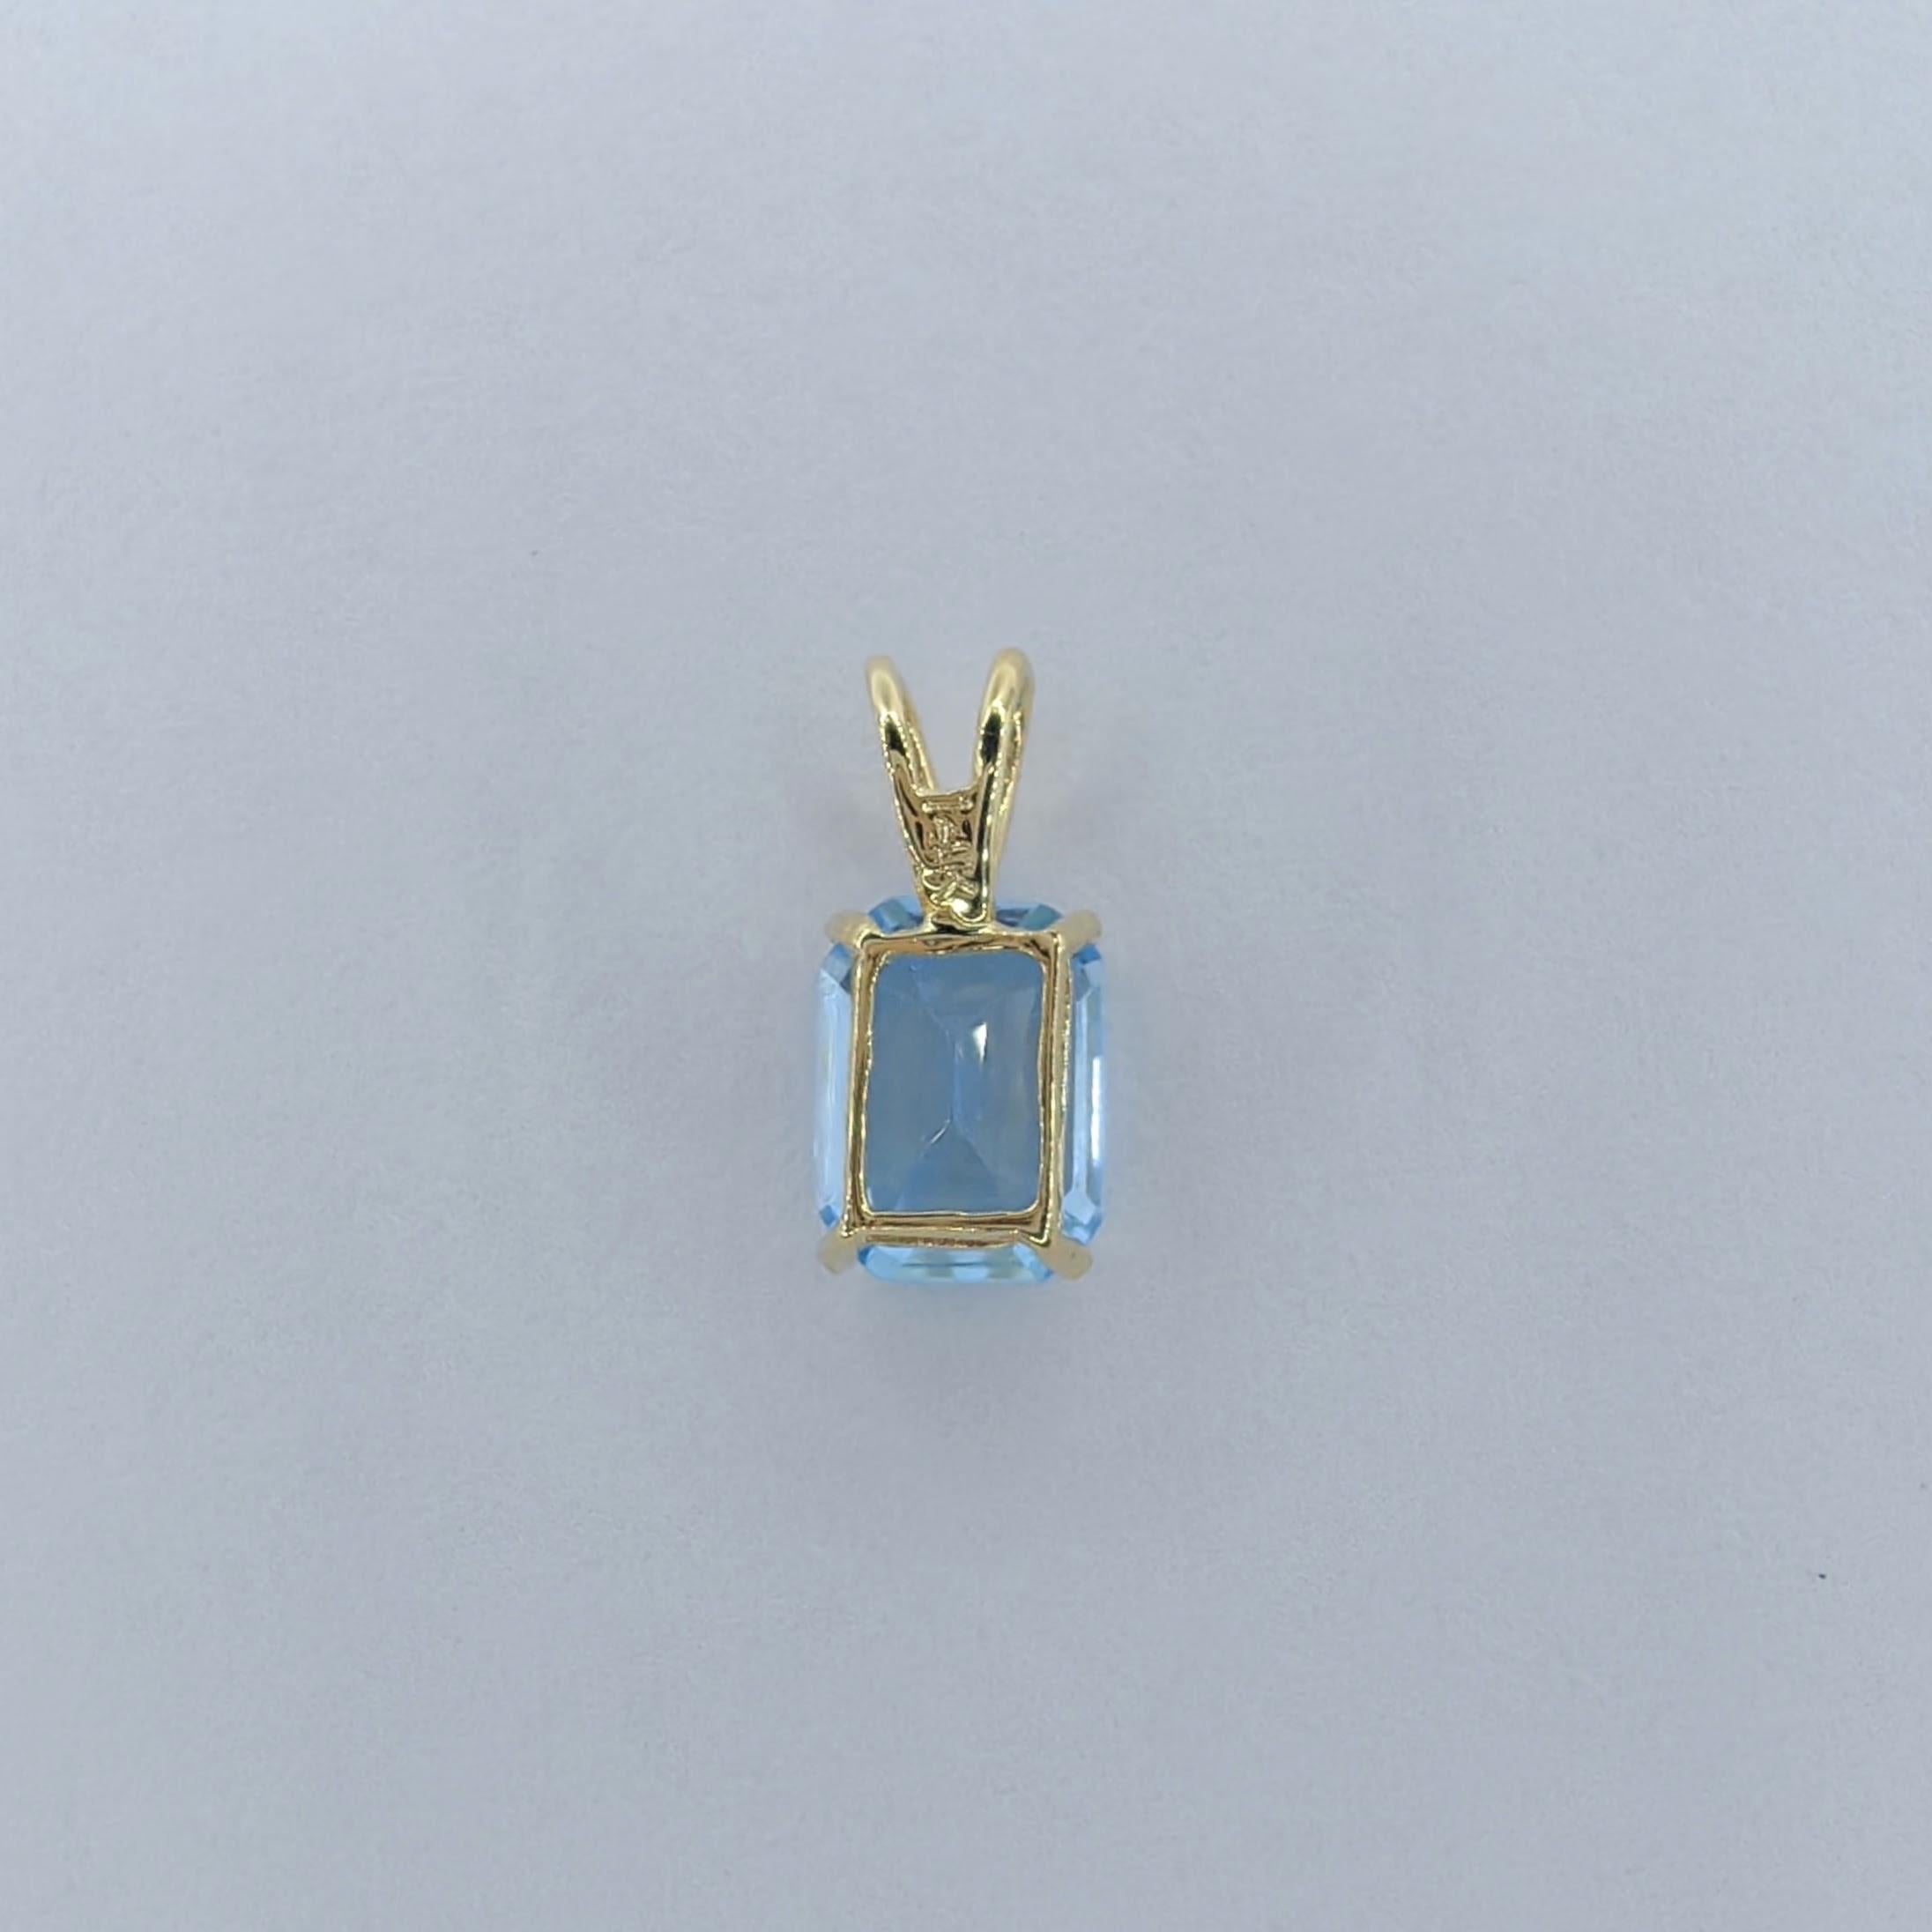 Women's Vintage 1980's Emerald Cut Blue Topaz Necklace Pendant in 14K Yellow Gold #1 For Sale